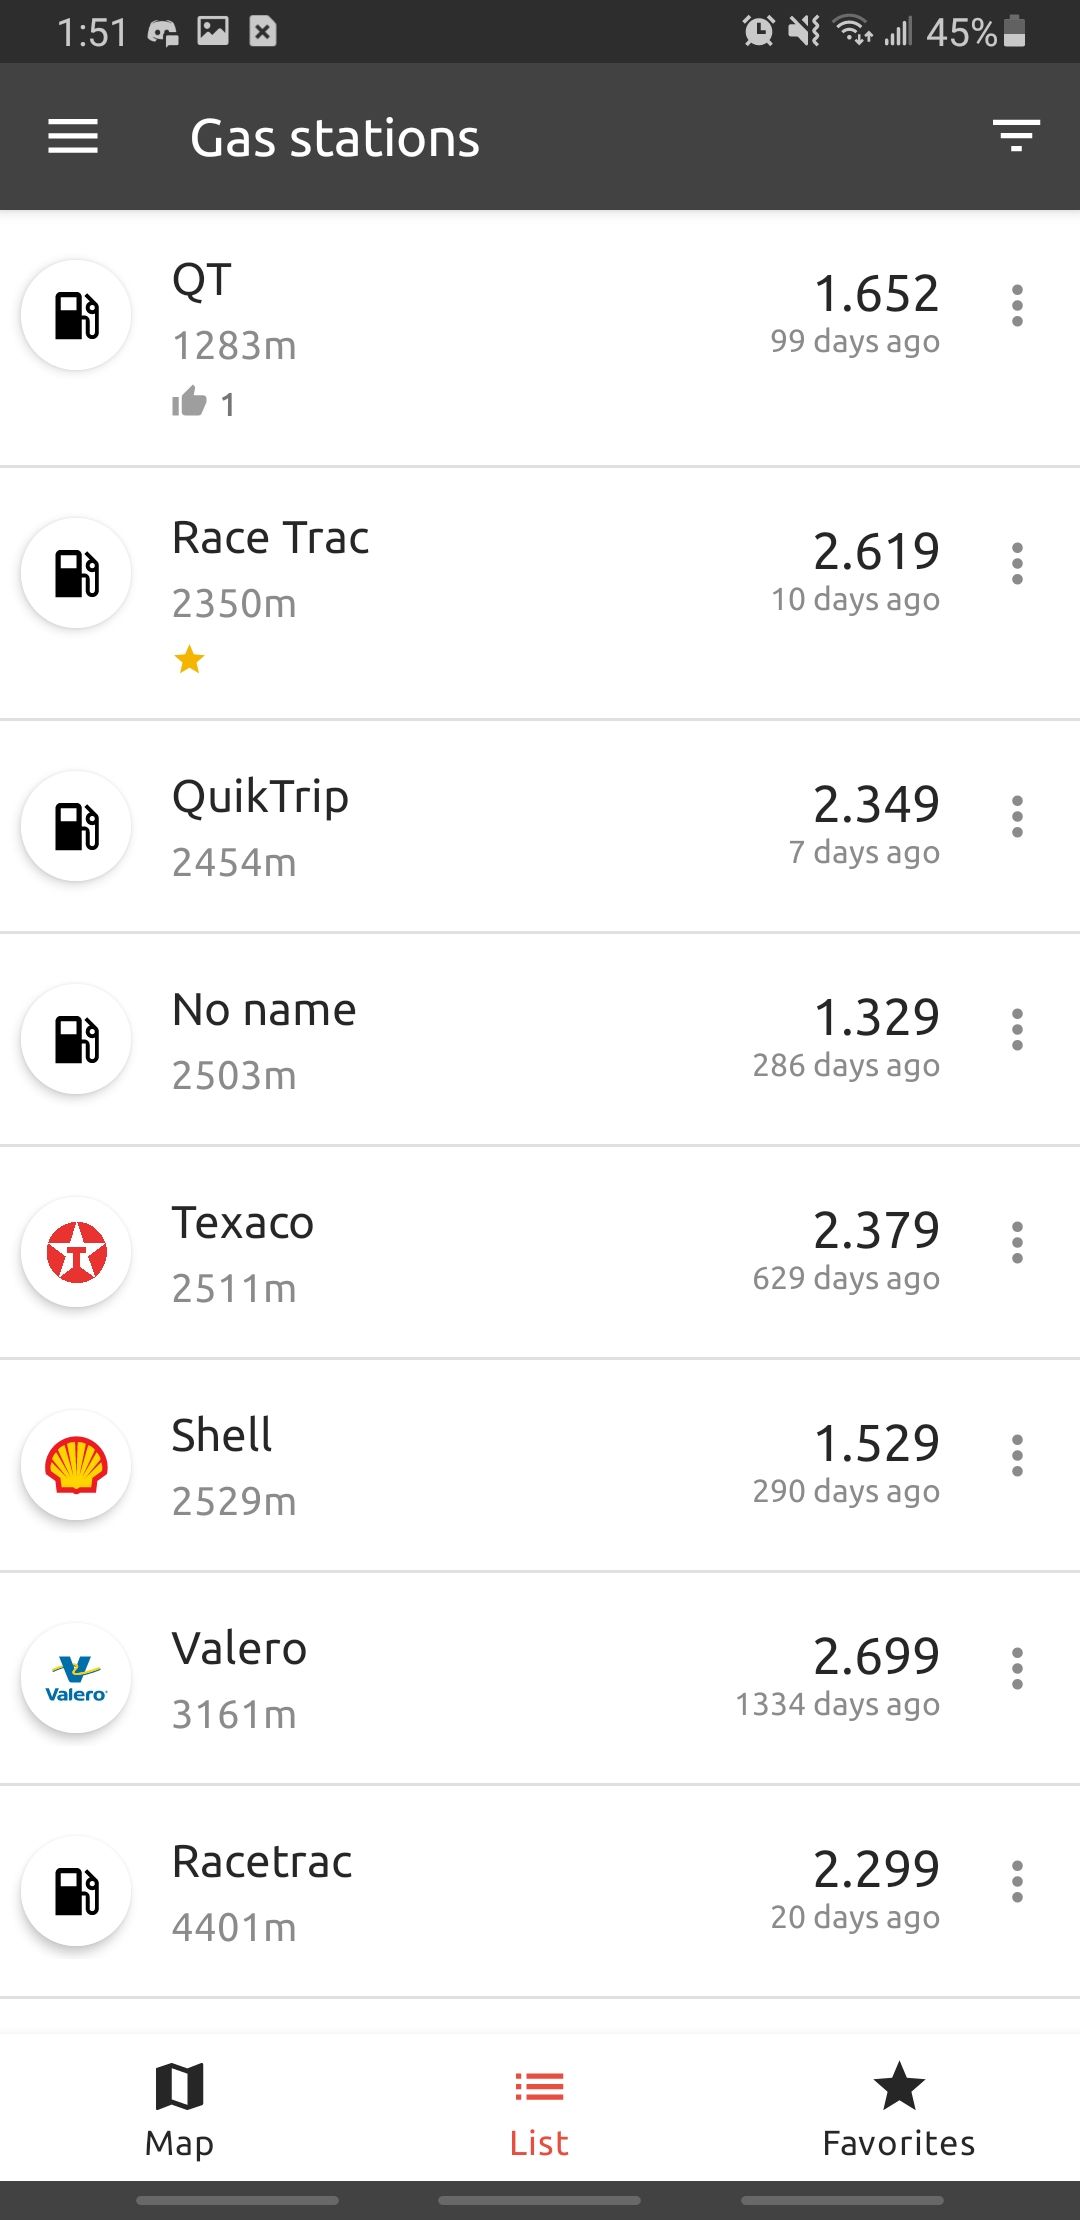 fuelio app showing nearby gas stations and their prices in a list view